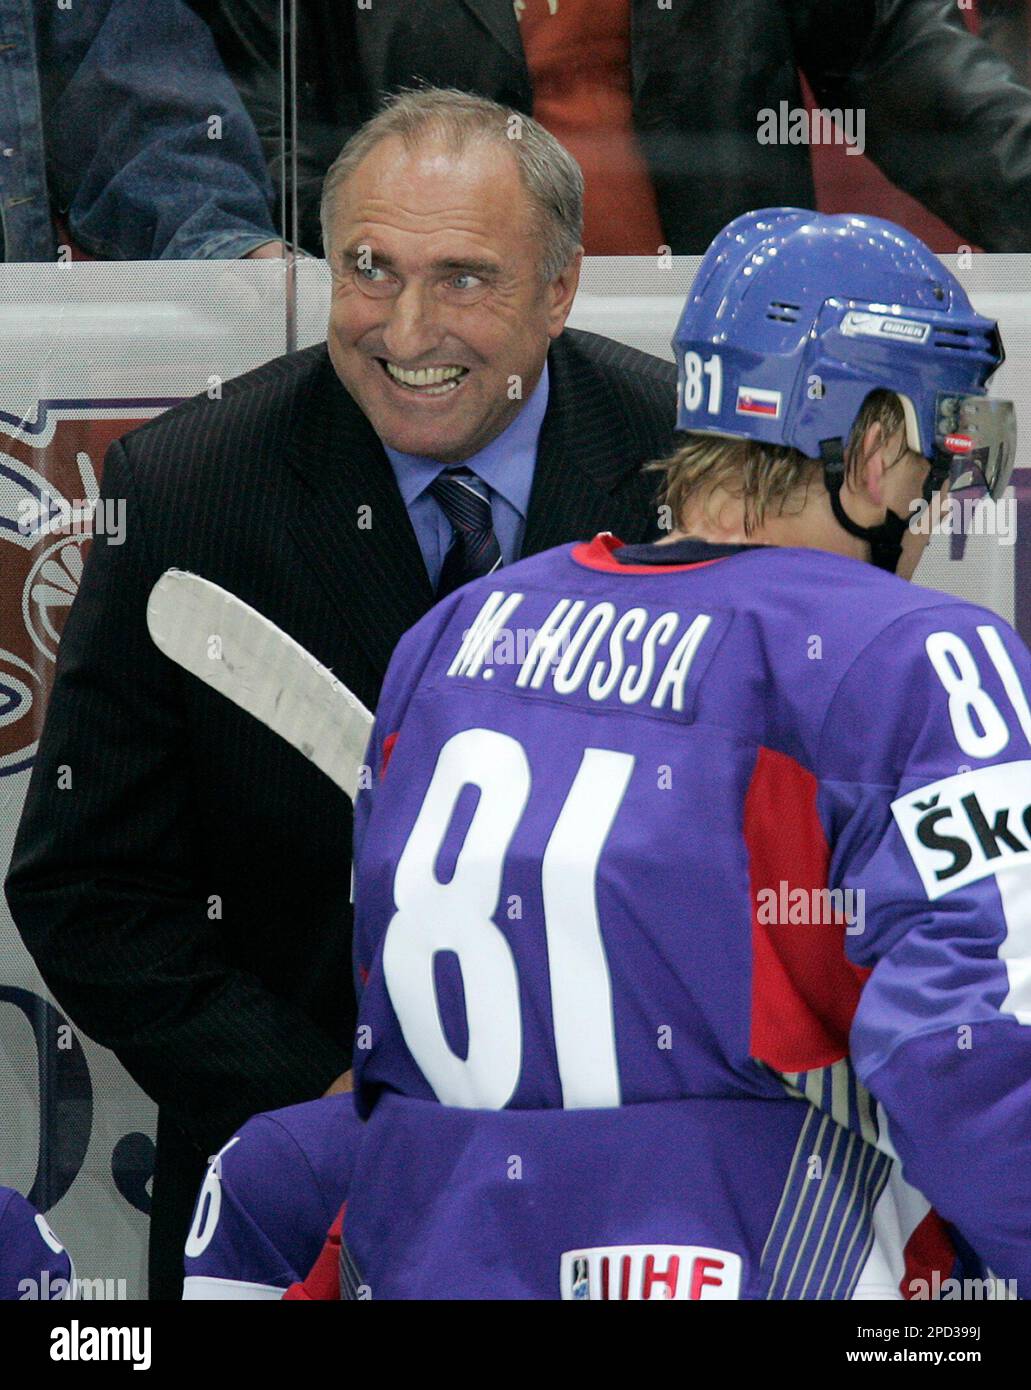 Slovakias coah Frantisek Hossa, left, smiles watching the end of his teams IIHF Ice Hockey World championship match against Sweden in Latvian capital Riga Sunday, May 14, 2006